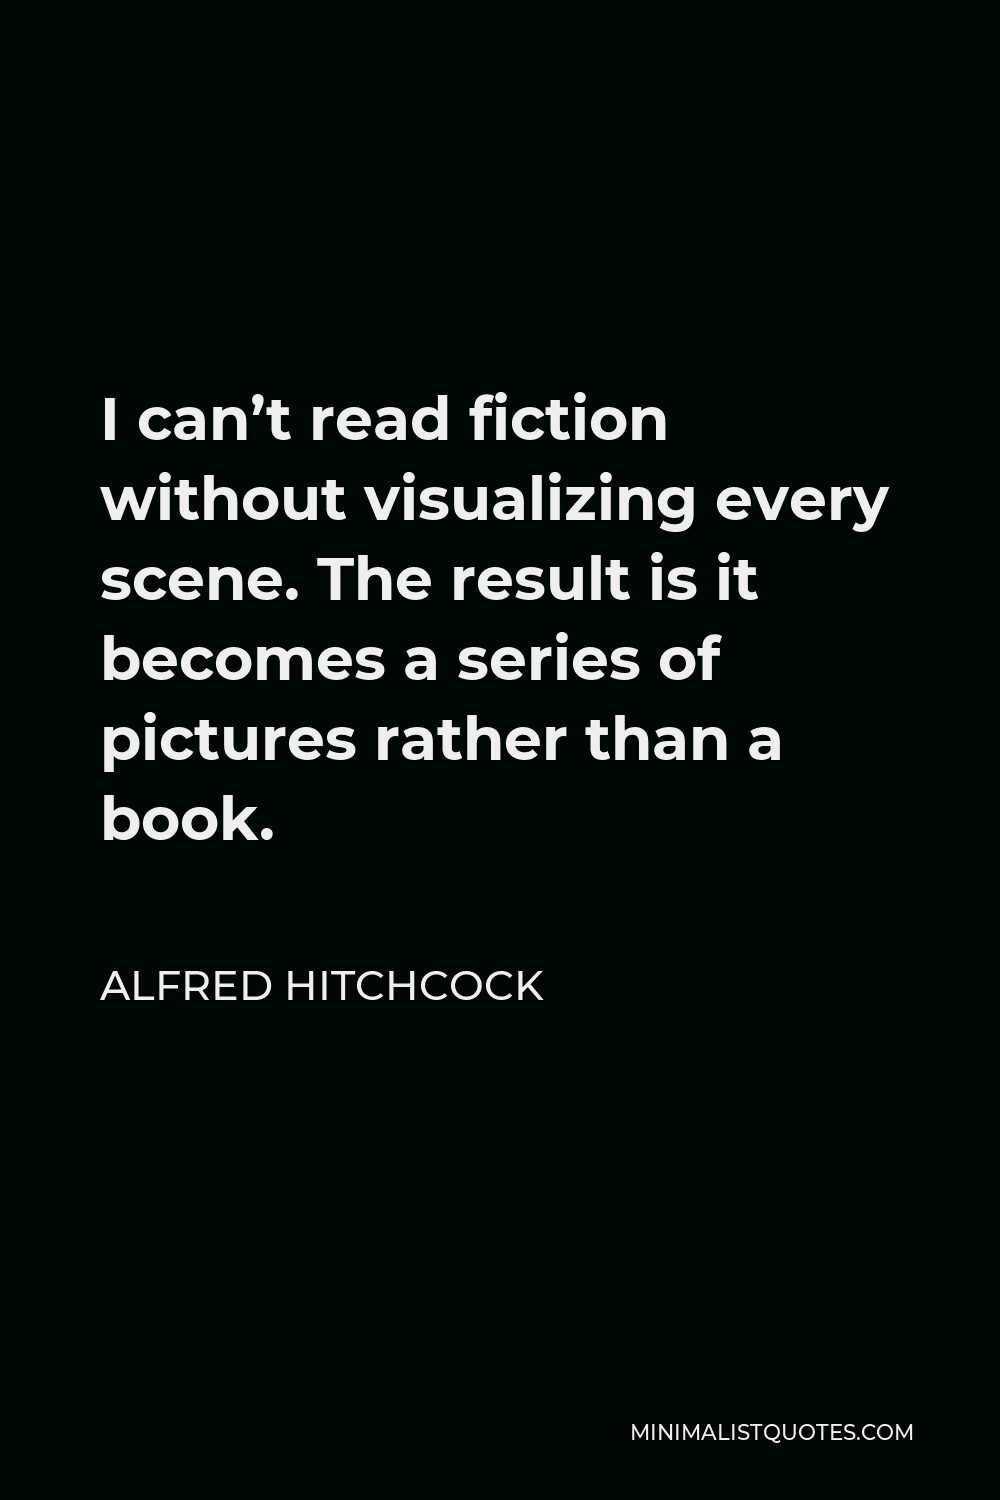 Alfred Hitchcock Quote - I can’t read fiction without visualizing every scene. The result is it becomes a series of pictures rather than a book.